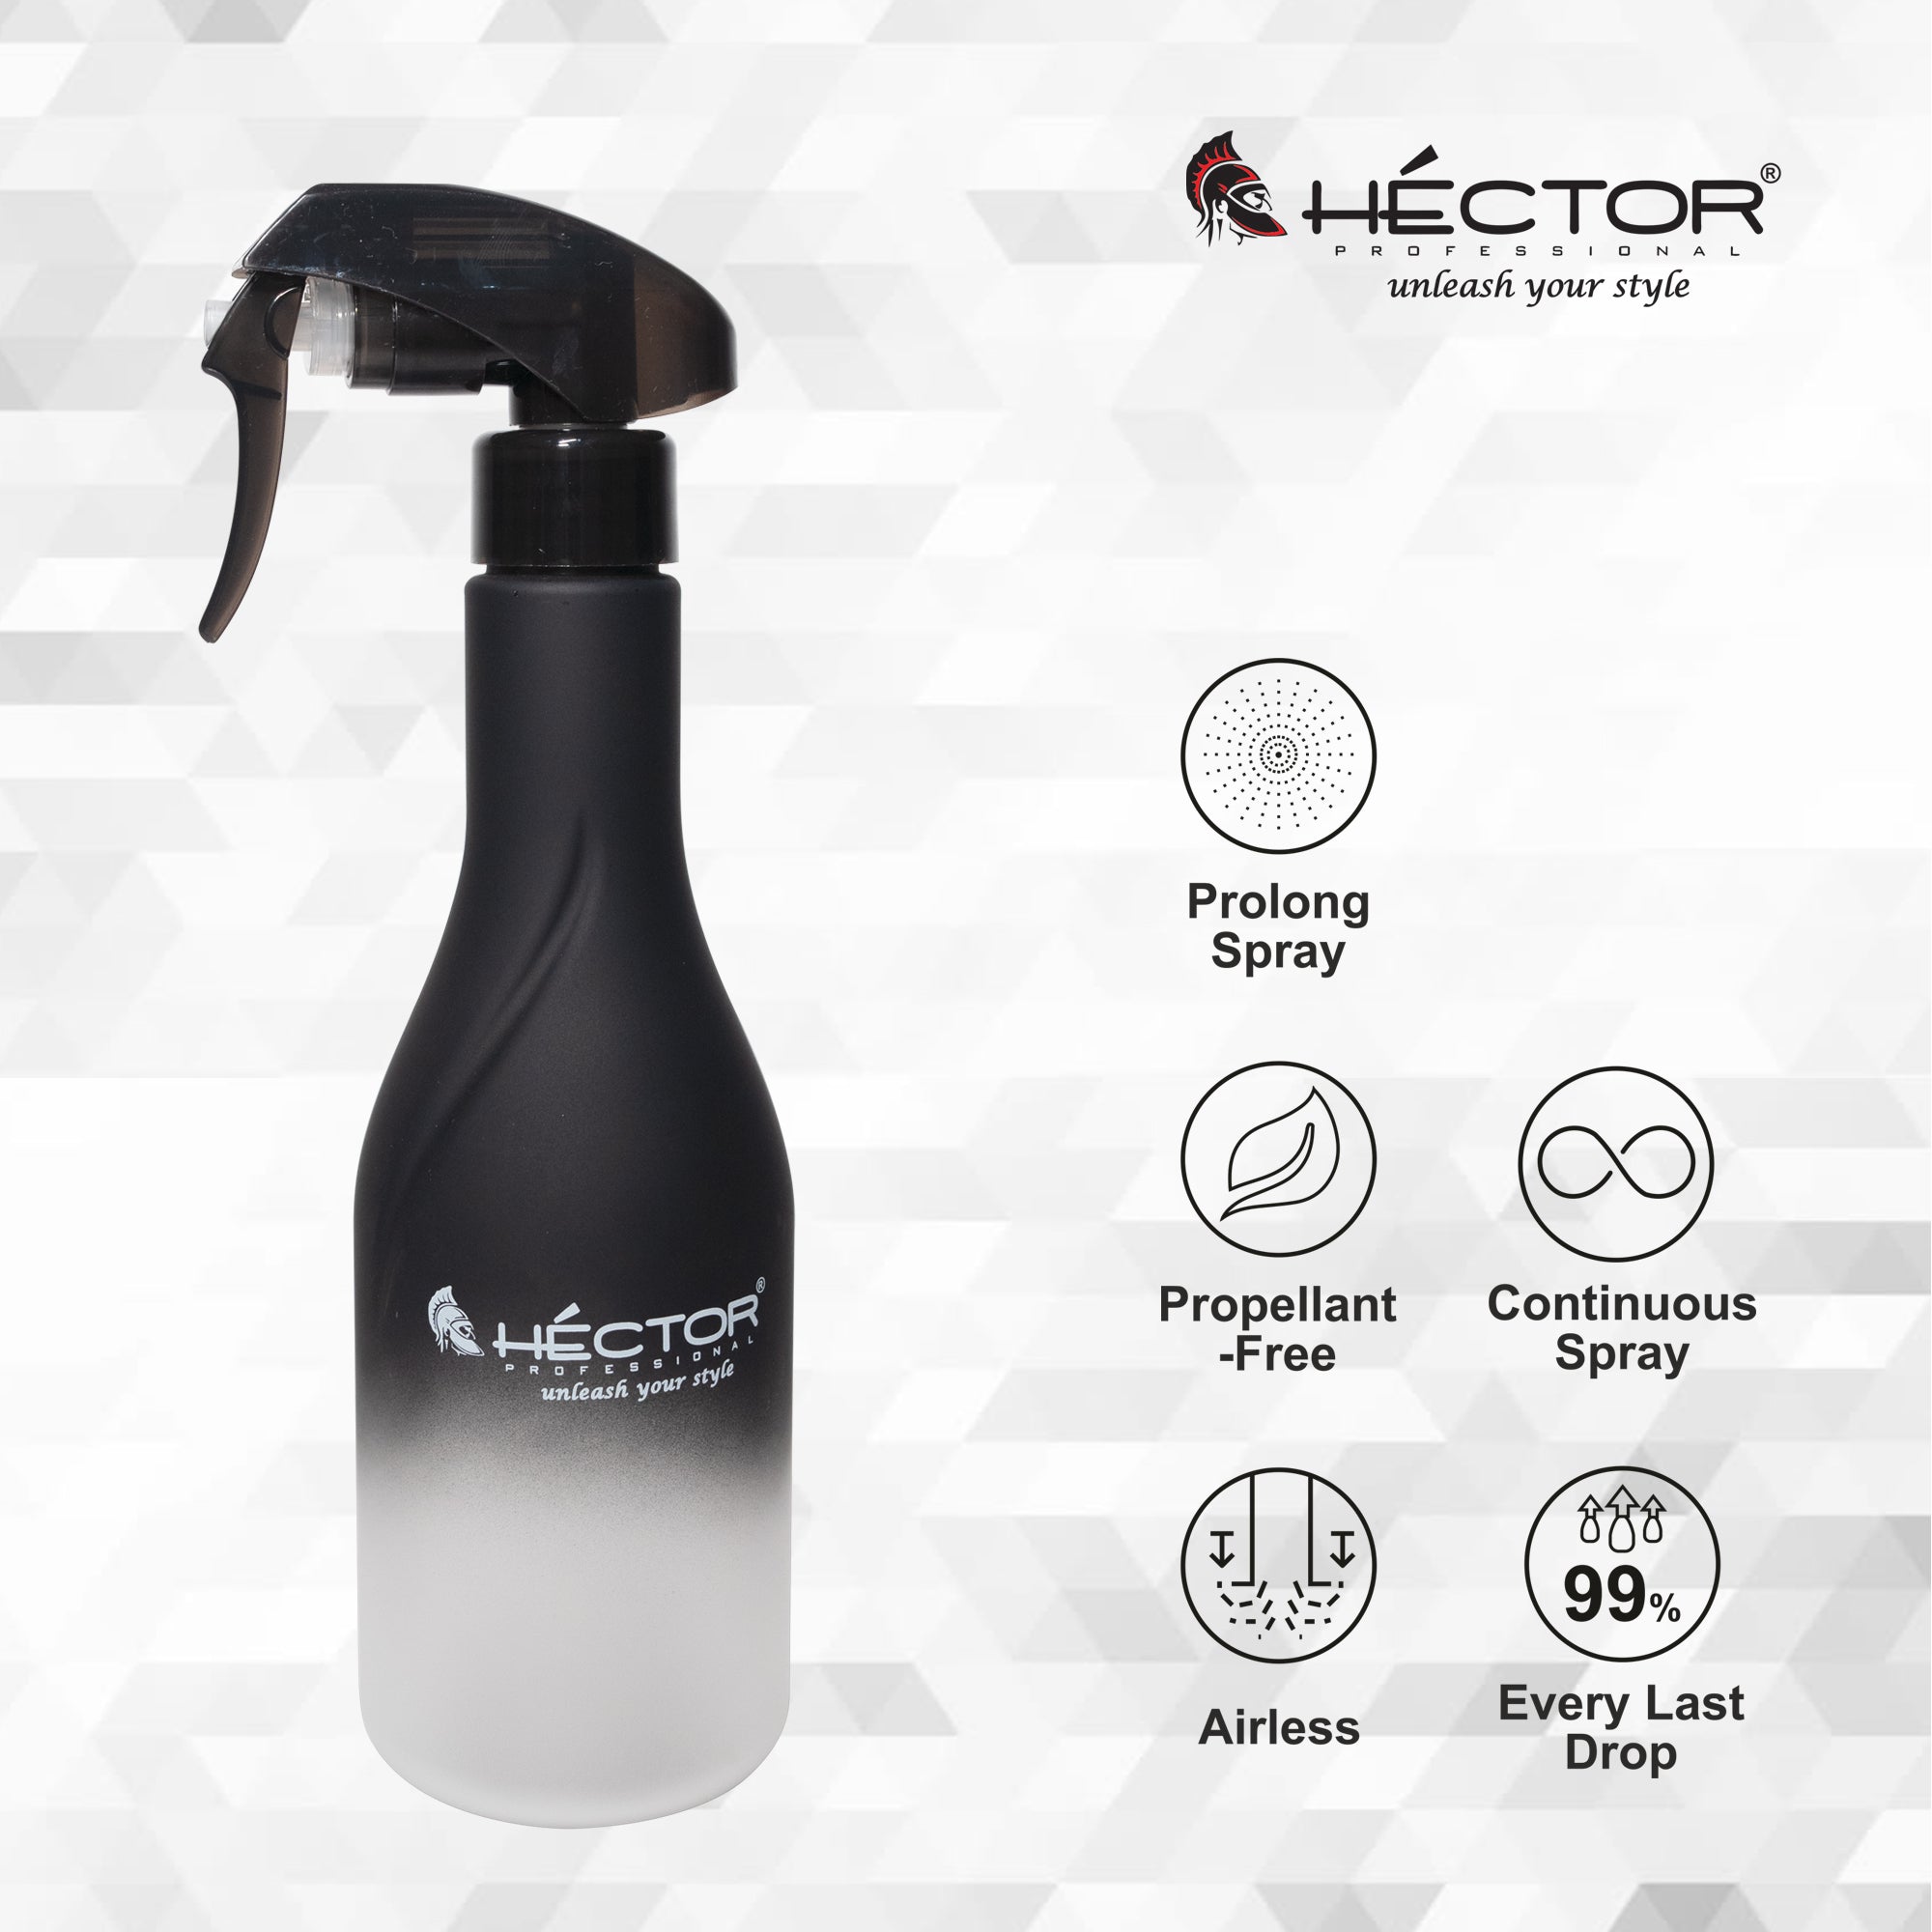 HECTOR Mist Spray Water Bottle For Hairstyling | Salon Use | Ironing | Plant Misting | Gadget & Car Cleaning | Dispensing Sanitizer | 300 ML Empty Bottle For Salon & Home | Pack of 2 Bottles